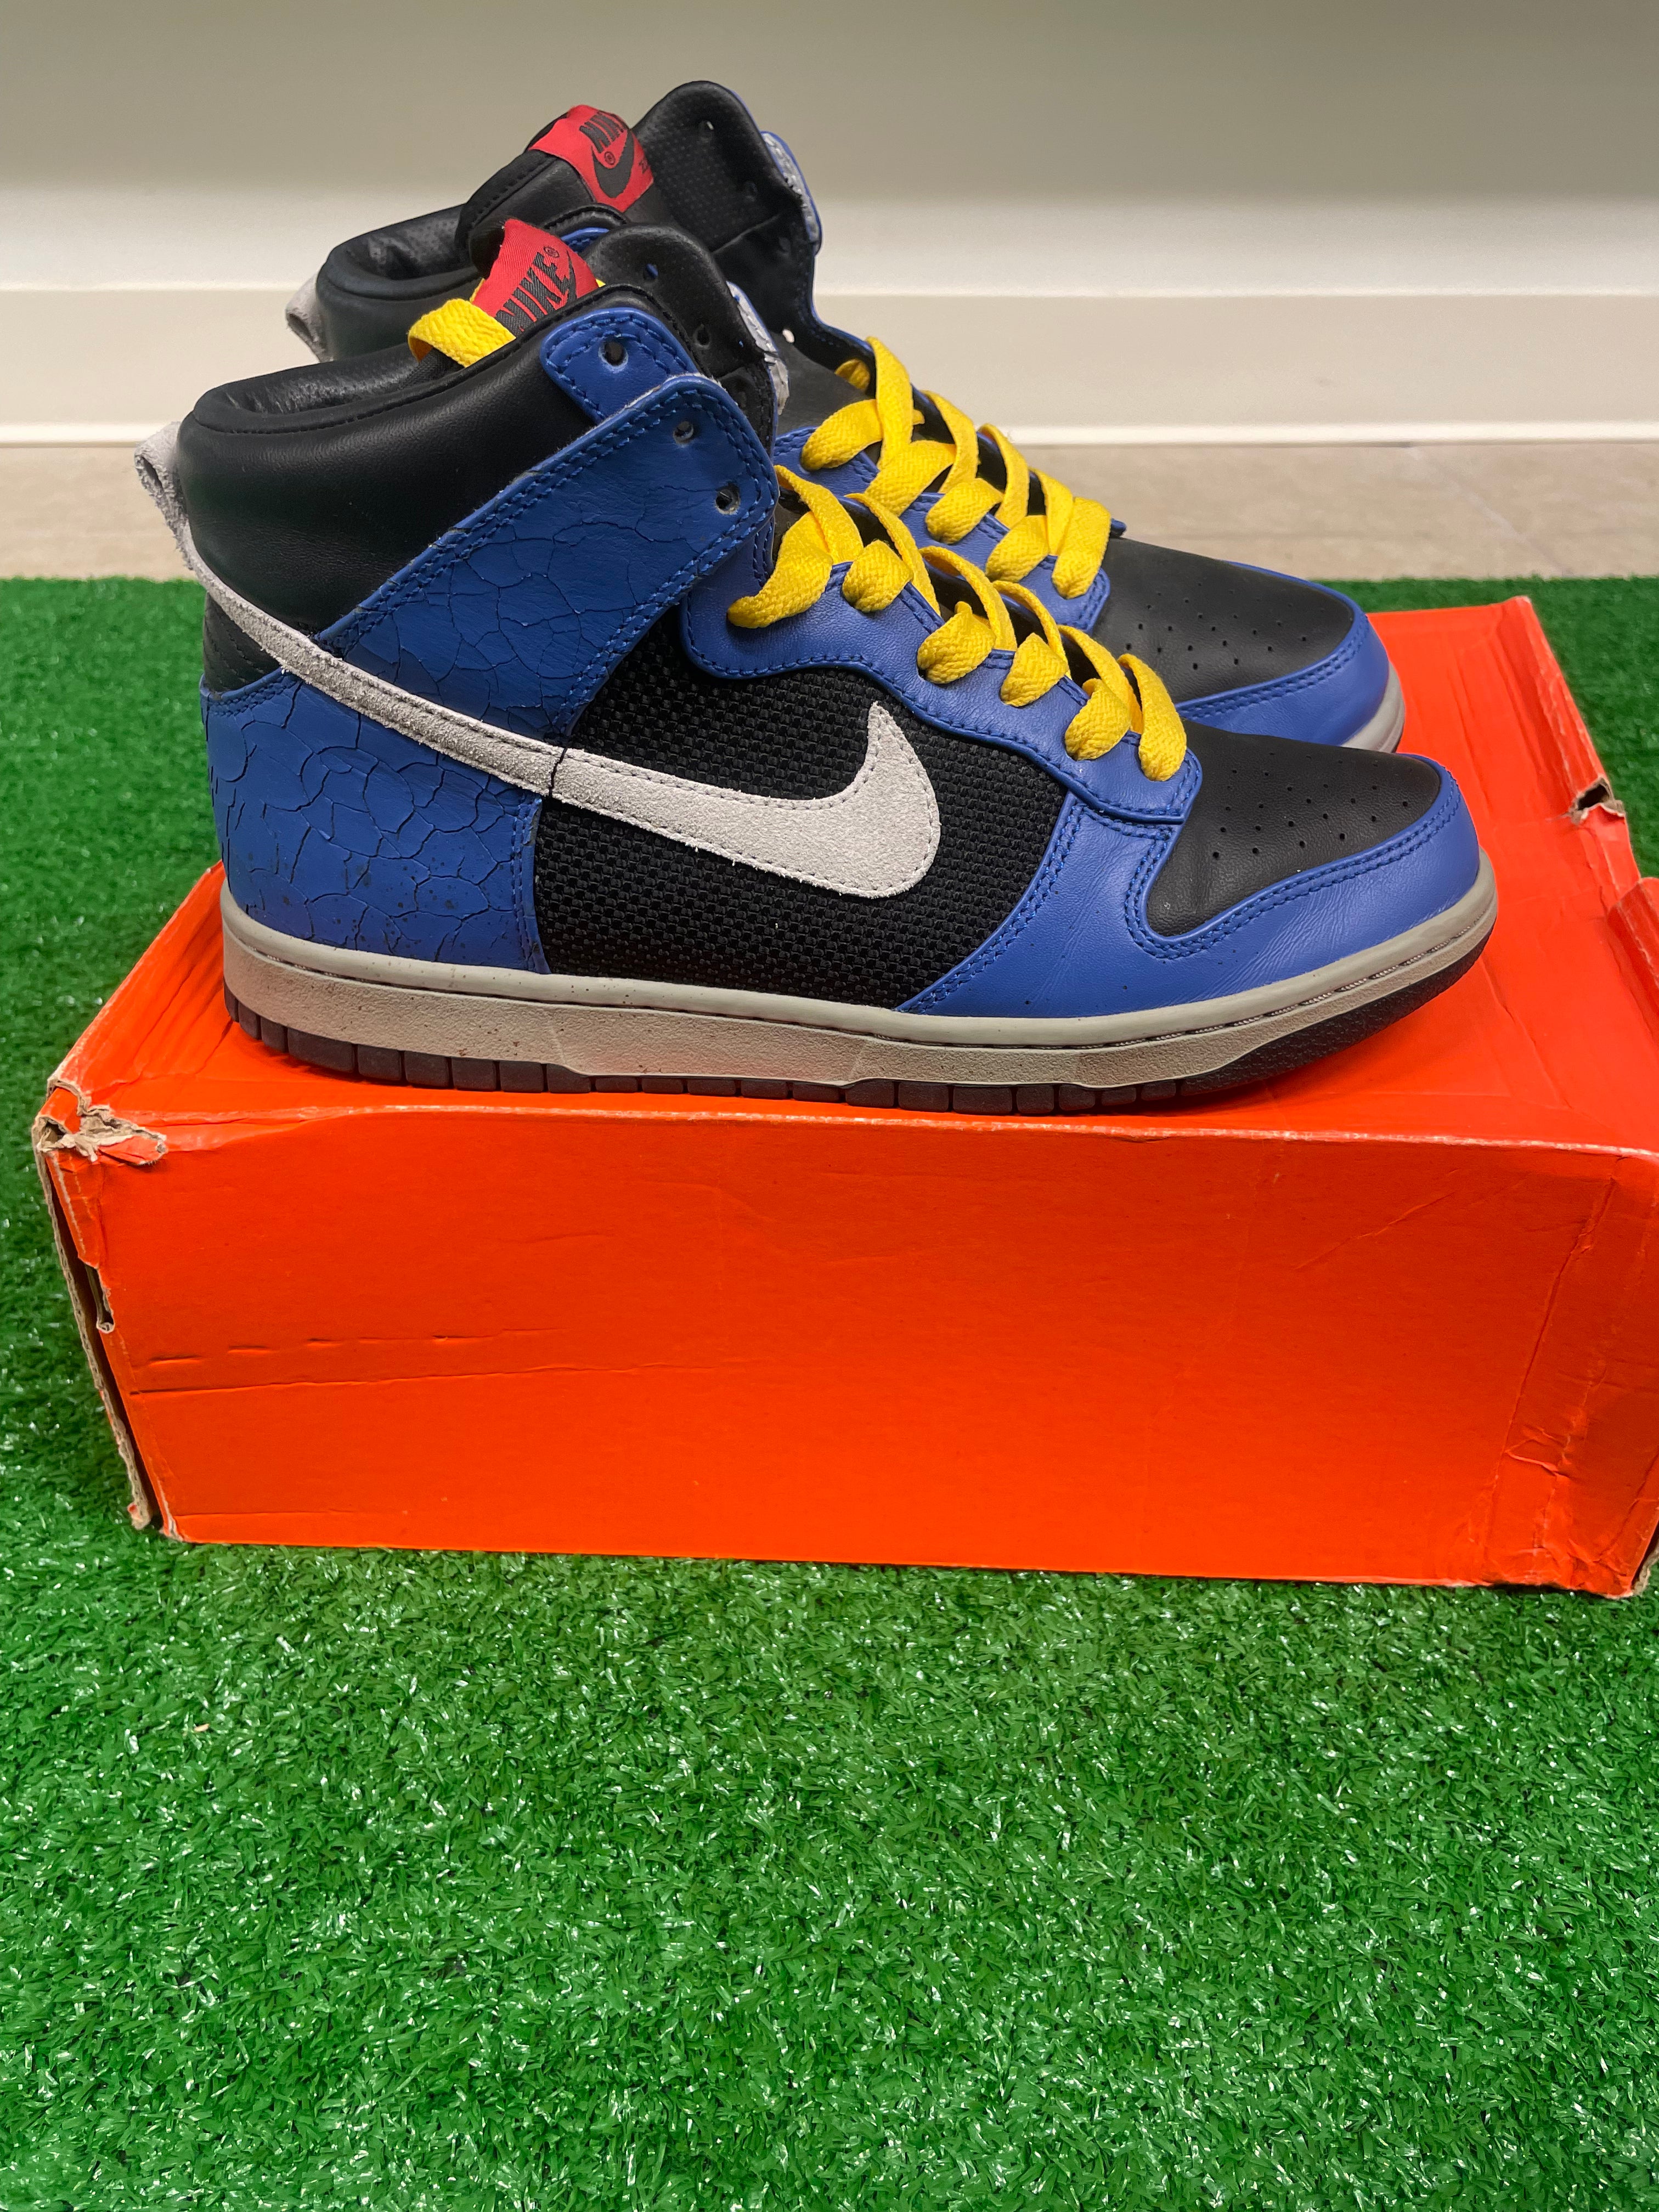 Pre Owned Nike Dunk High Cracked Leather Men Shoes with og box